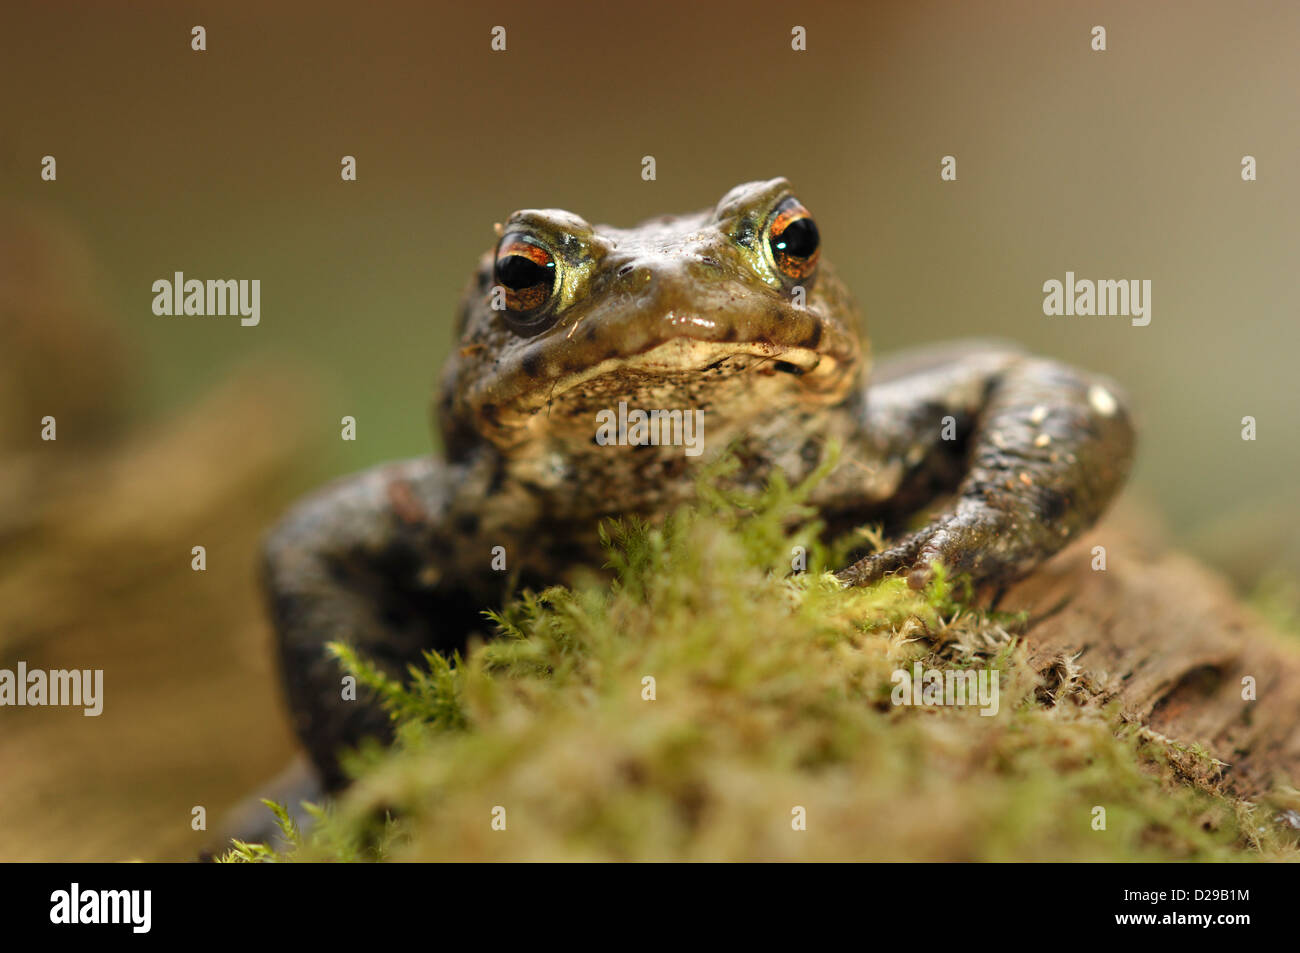 Common toad.peeping over a mound  Dorset, UK Stock Photo